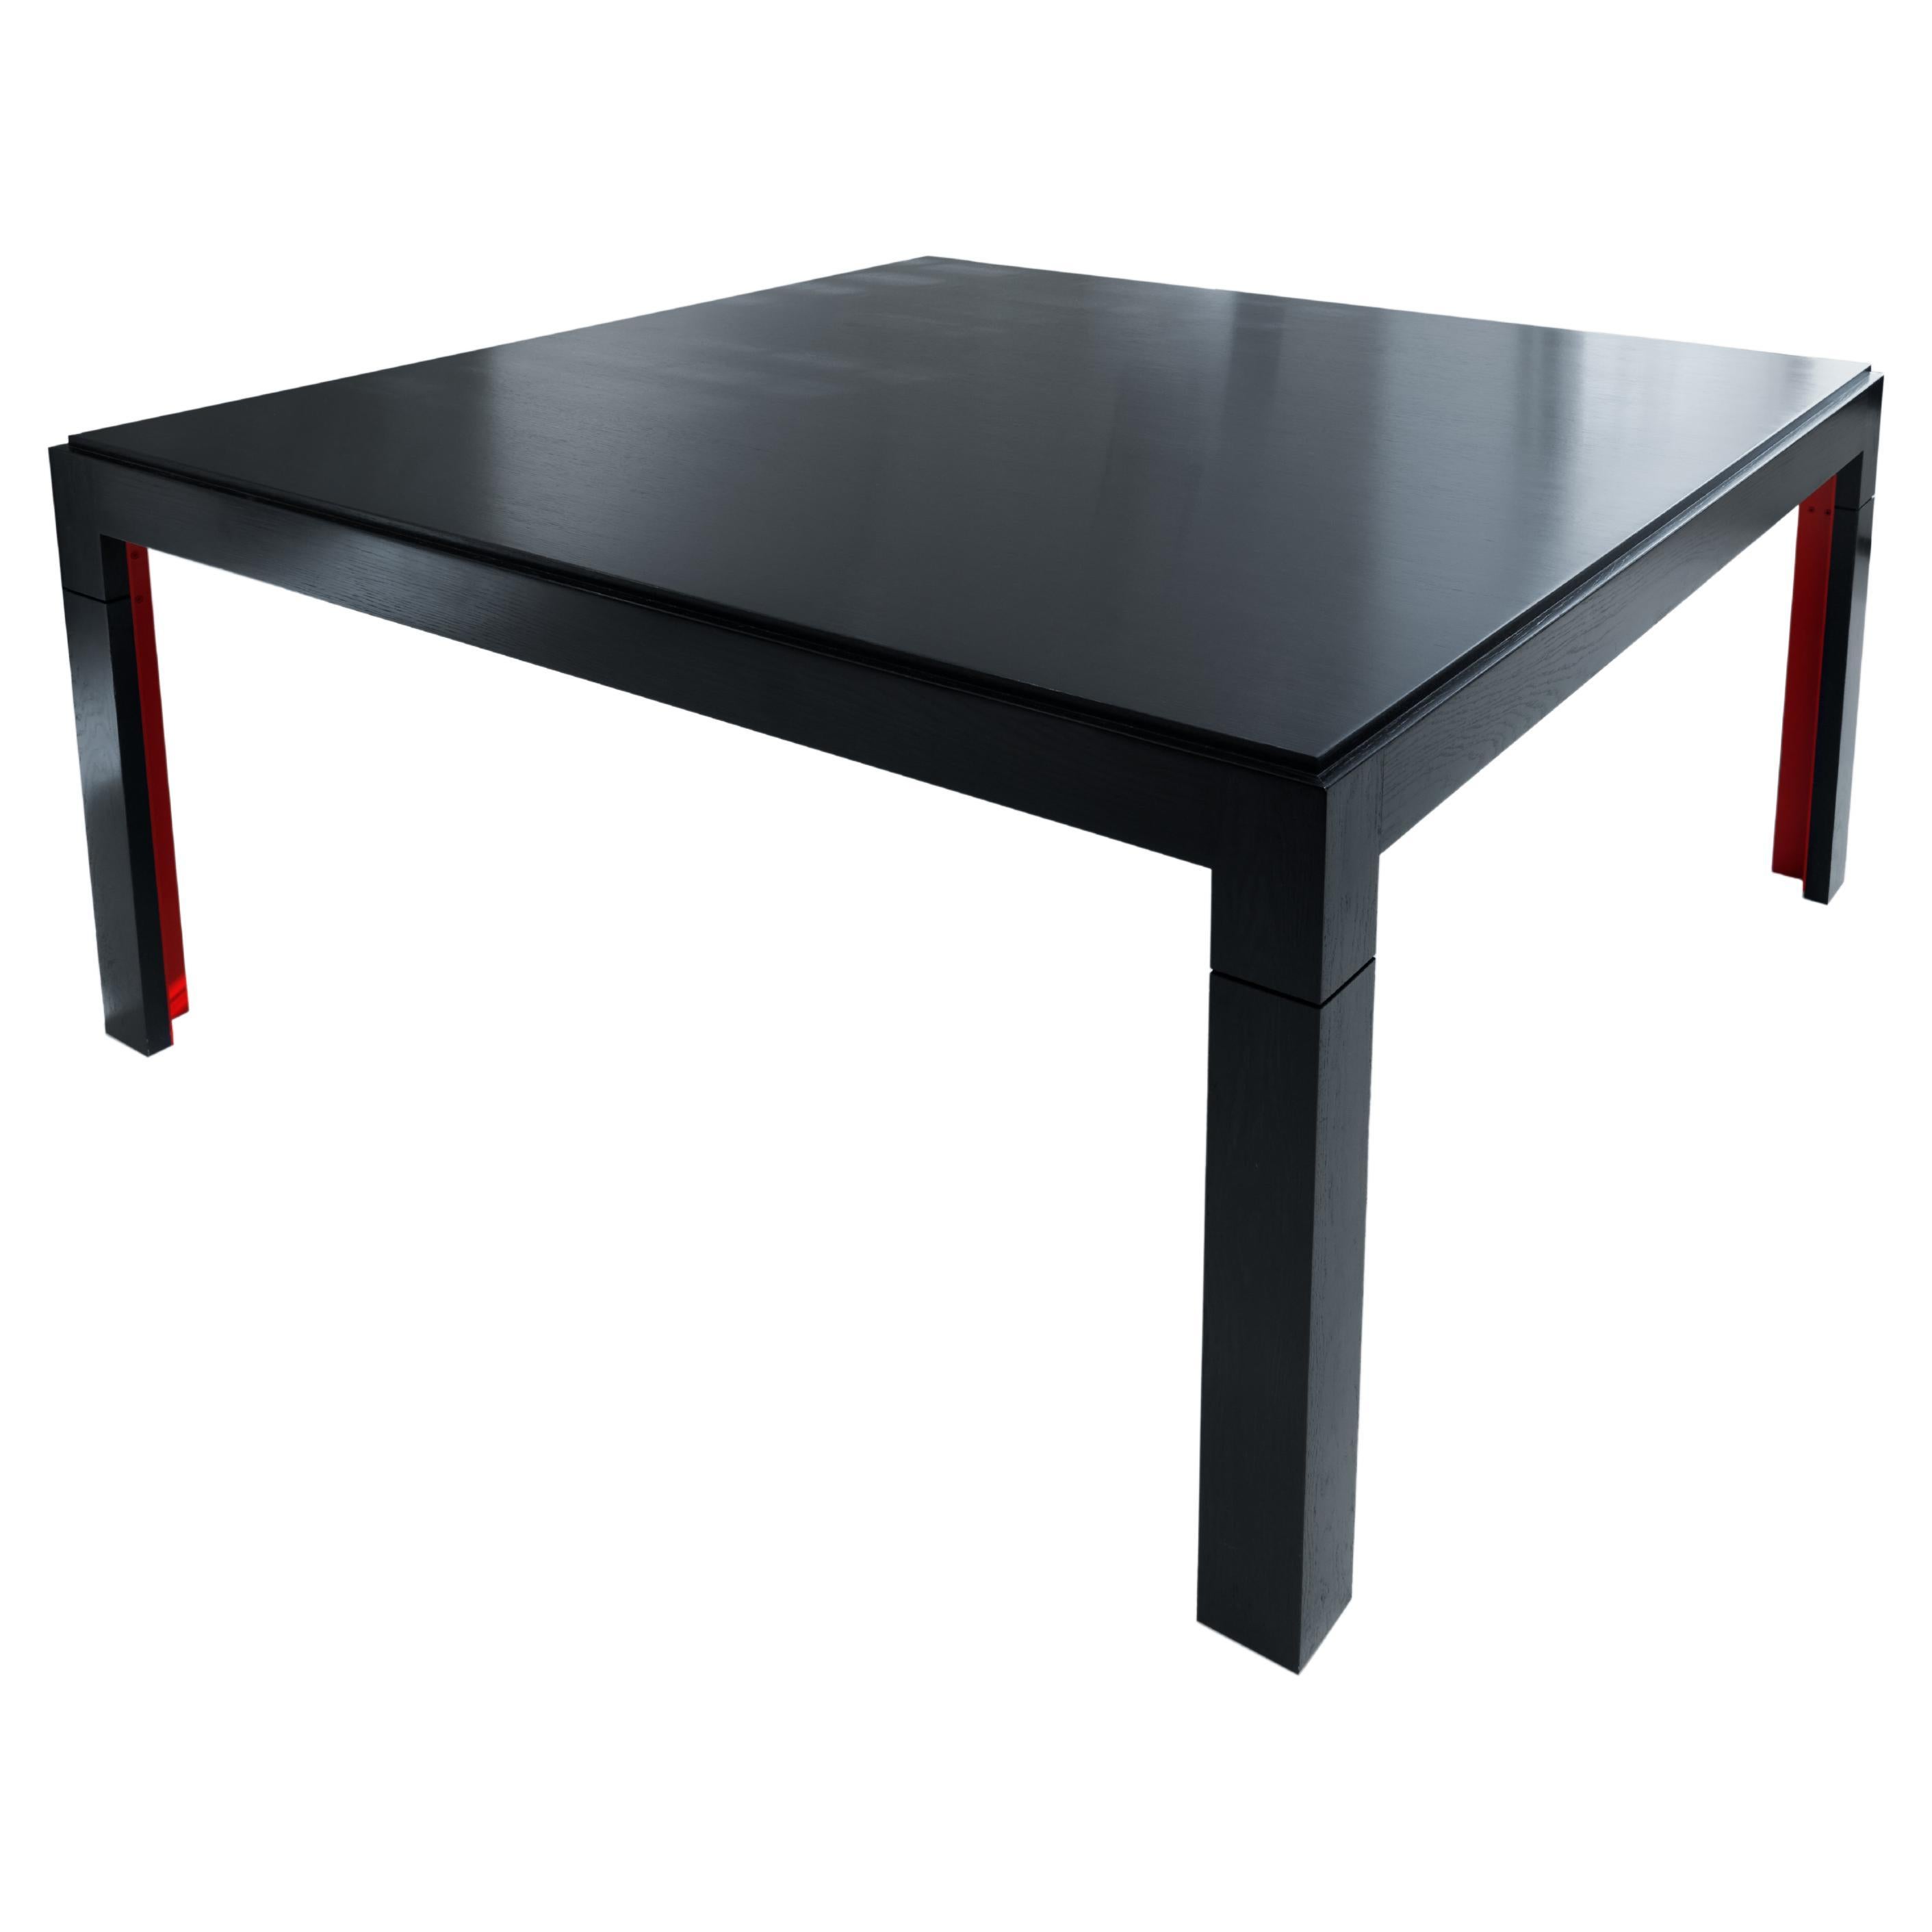 Square Paris Table by Gael Camu for Camu Editions, Ebonised Cherry 2018 Edition For Sale